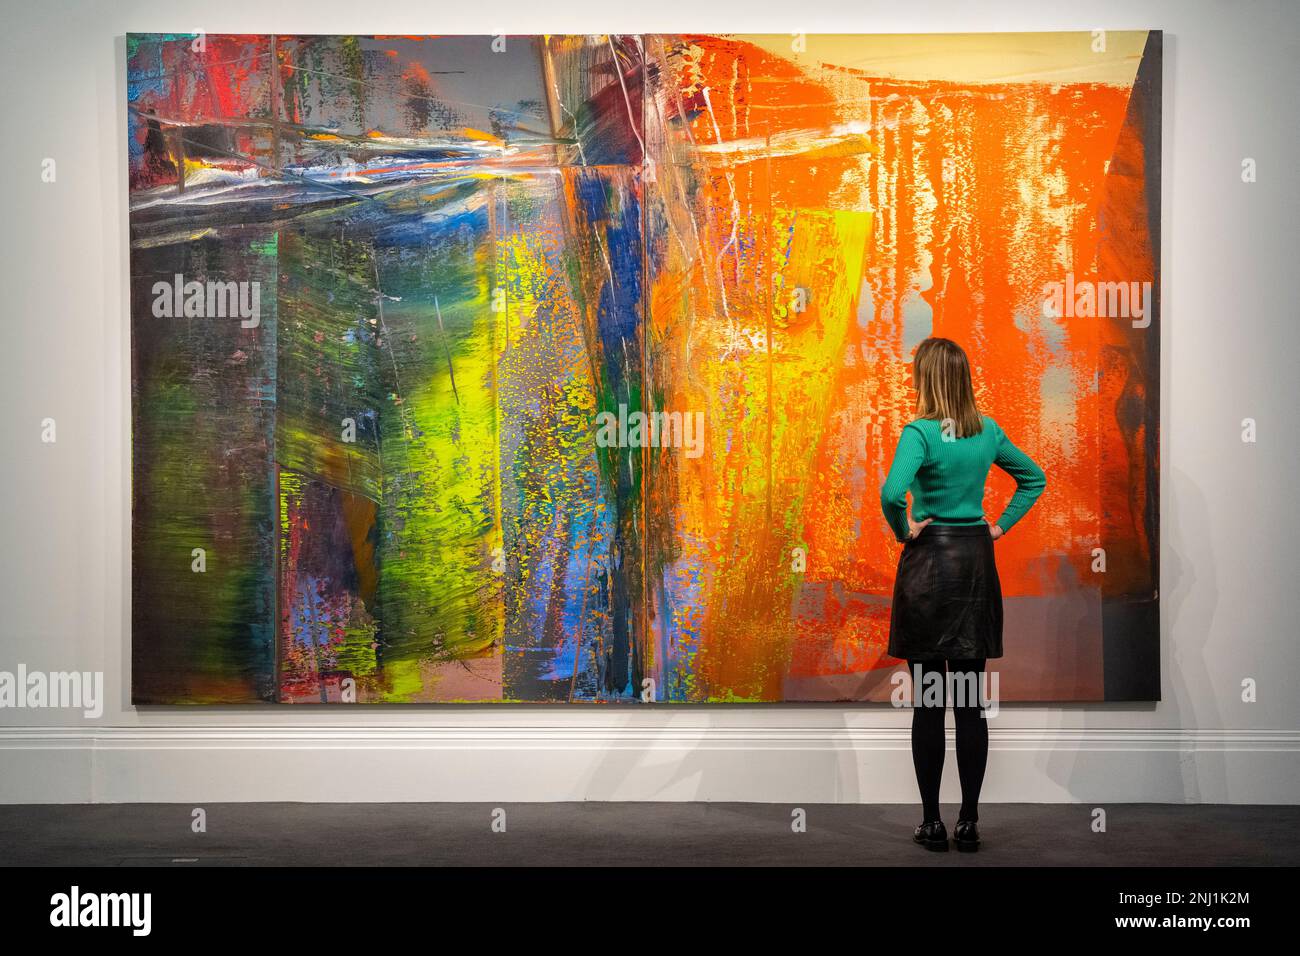 London, UK.  22 February 2023. A staff member views 'Abstraktes Bild' by Gerhard Richter (Est. in the region of £37 million) at a preview of highlights from Sotheby’s upcoming Modern & Contemporary Evening sale featuring works by Kandinsky, Picasso, Richter and Munch.  The sale takes place at Sotheby’s New Bond Street galleries on 1 March 2023. Credit: Stephen Chung / Alamy Live News Stock Photo